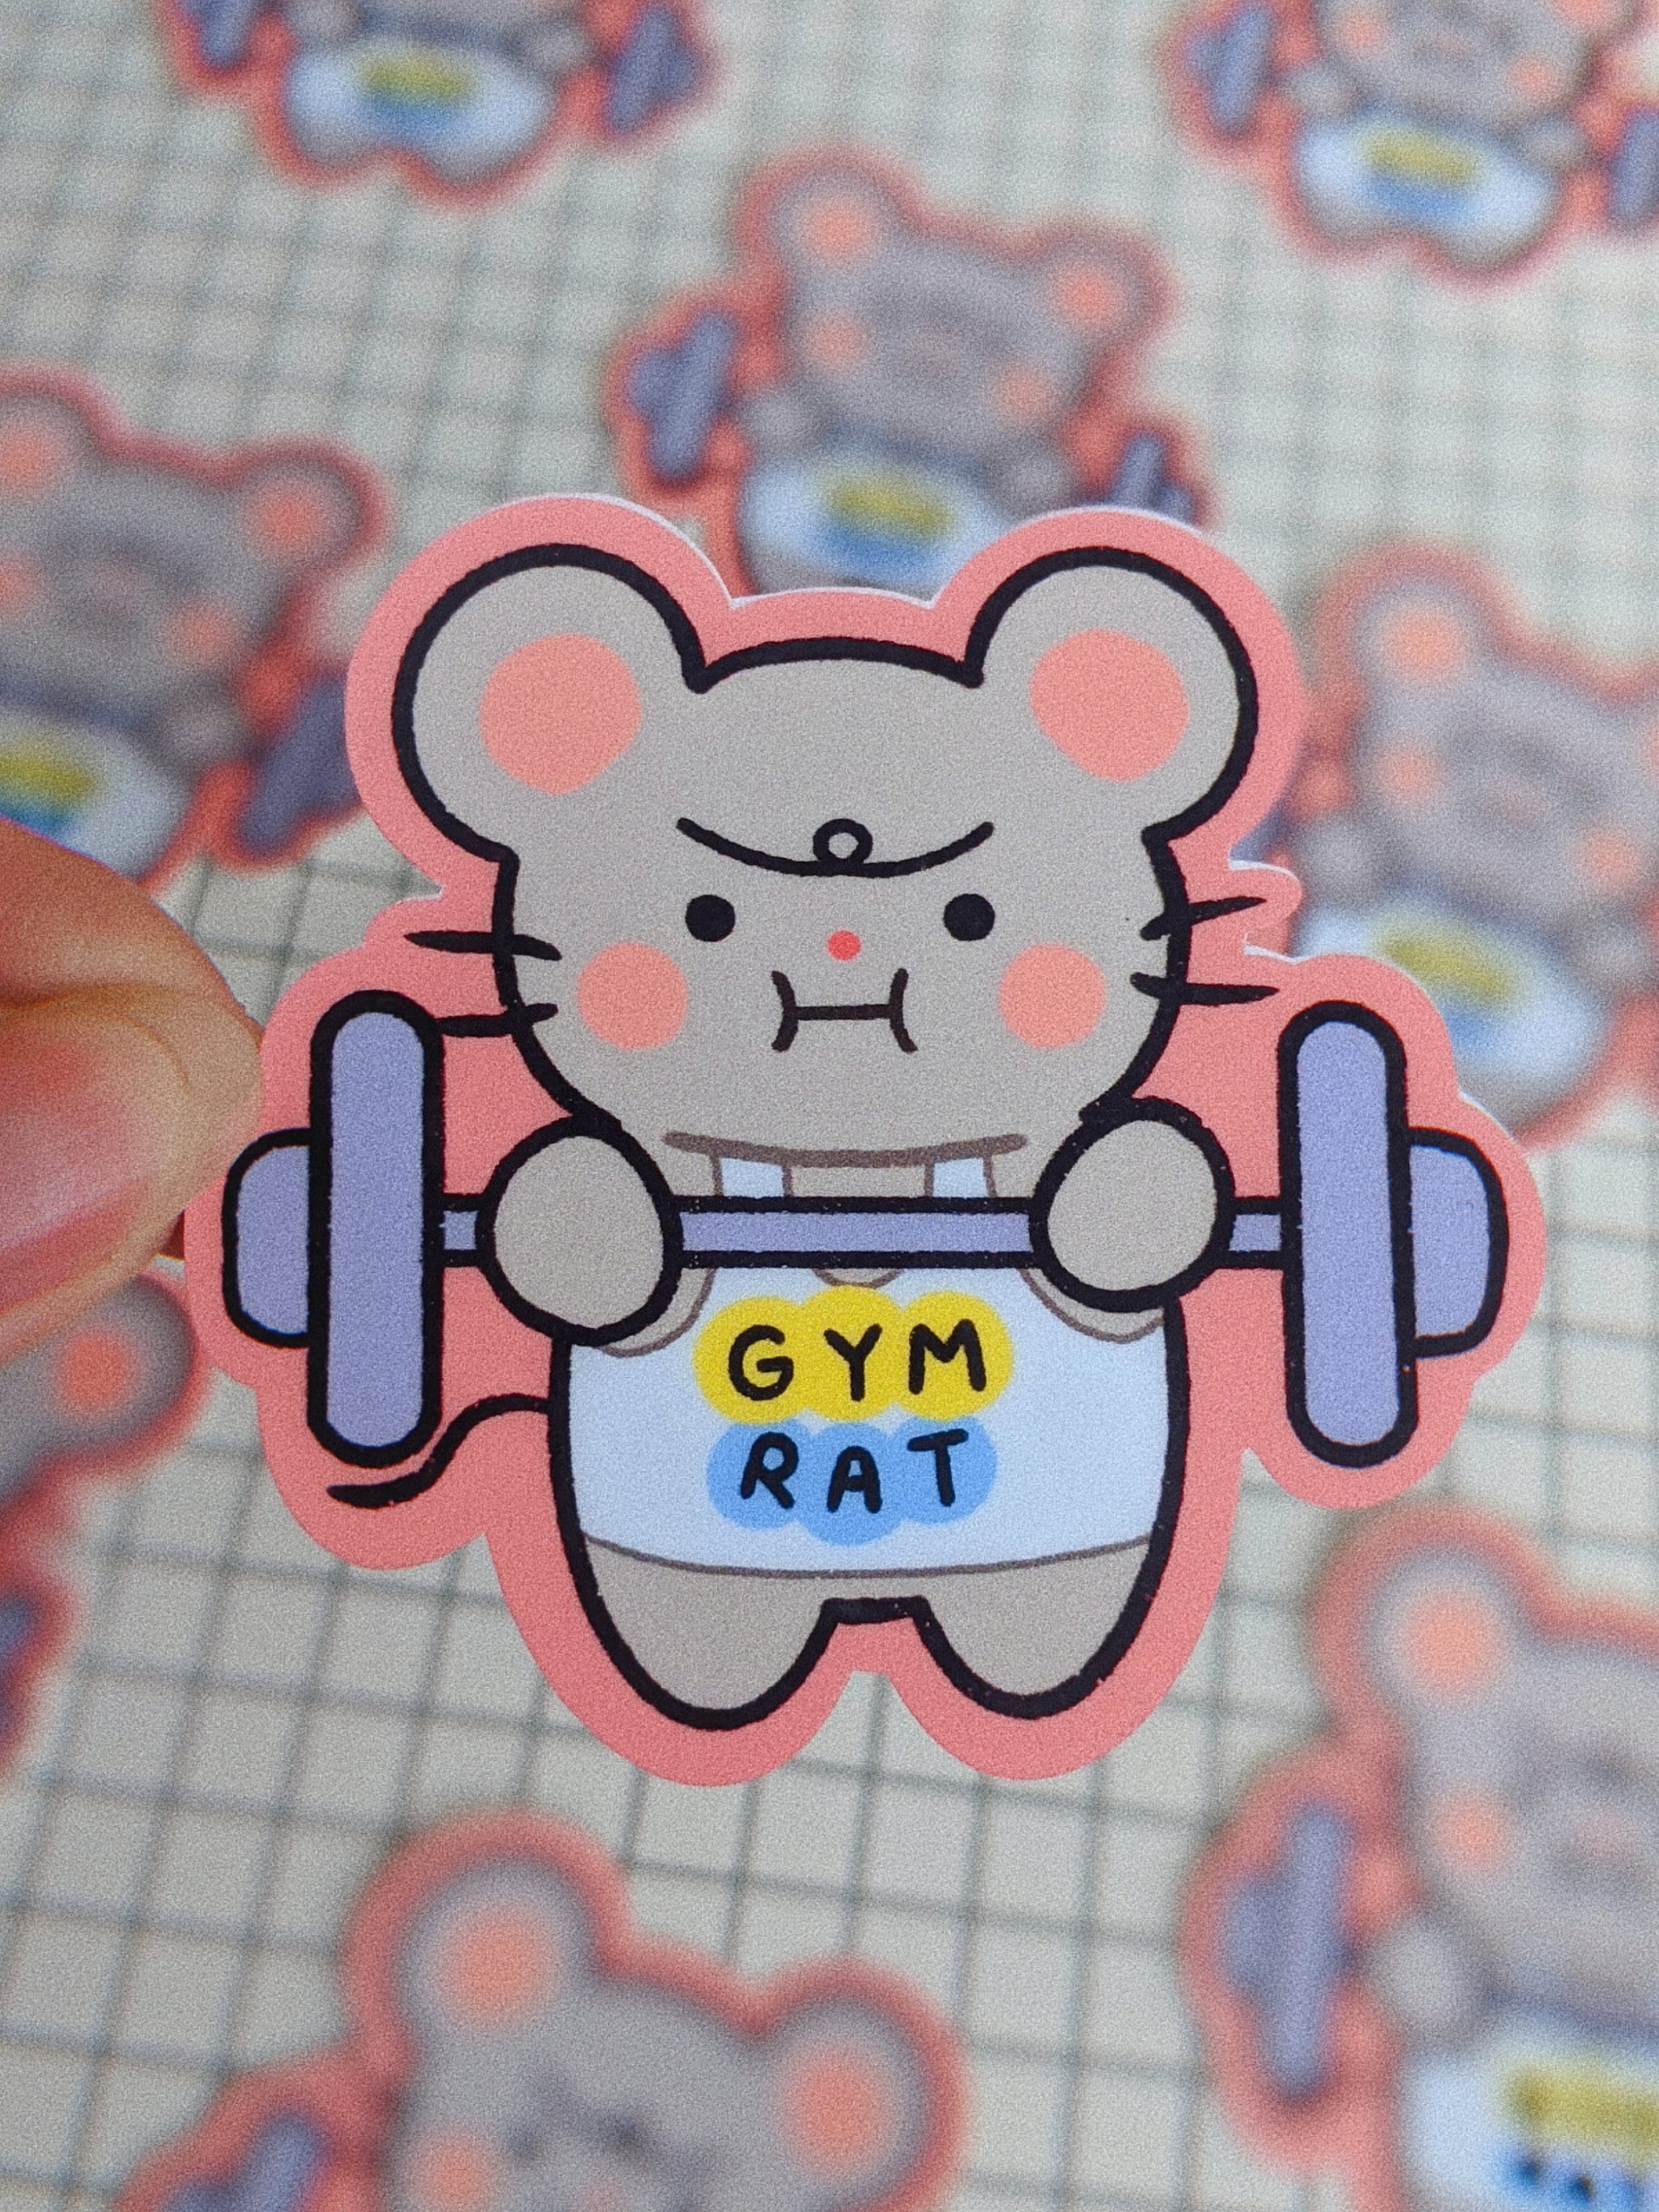 Certified Gym Rat Greeting Cards | LookHUMAN